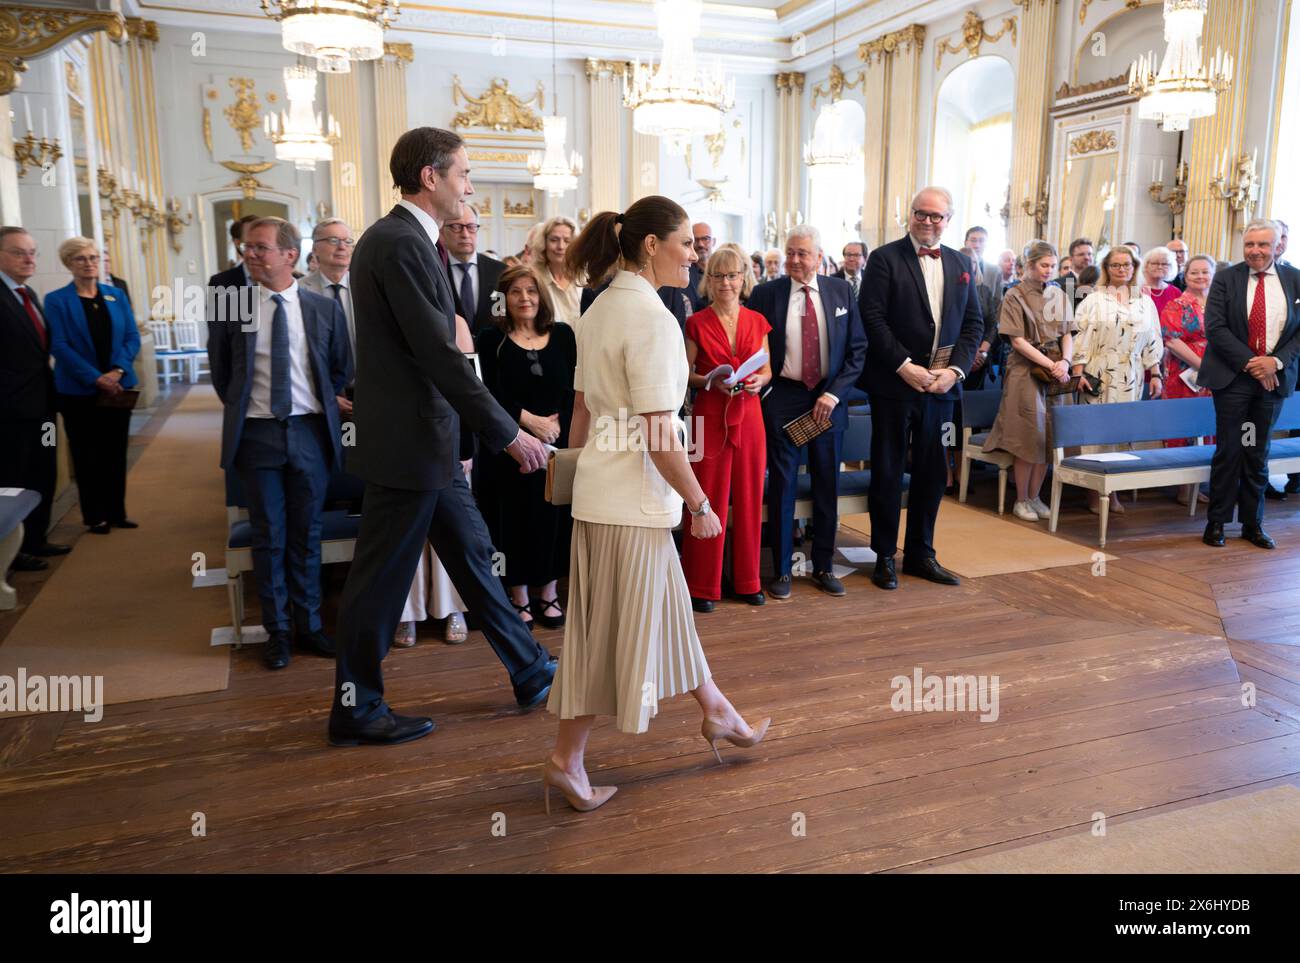 Stockholm, Sweden. 15th May, 2024. Crown Princess Victoria of Sweden attends the celebration of the new Swedish Academy Dictionary (SAOB), at the Swedish Academy in Stockholm Sweden, Wednesday May 15, 2024. Here the Crown Princess is seen together with Mats Malm, Permanent Secretary of the Swedish Academy. Photo: Anders Wiklund/TT/Code 10040 Credit: TT News Agency/Alamy Live News Stock Photo